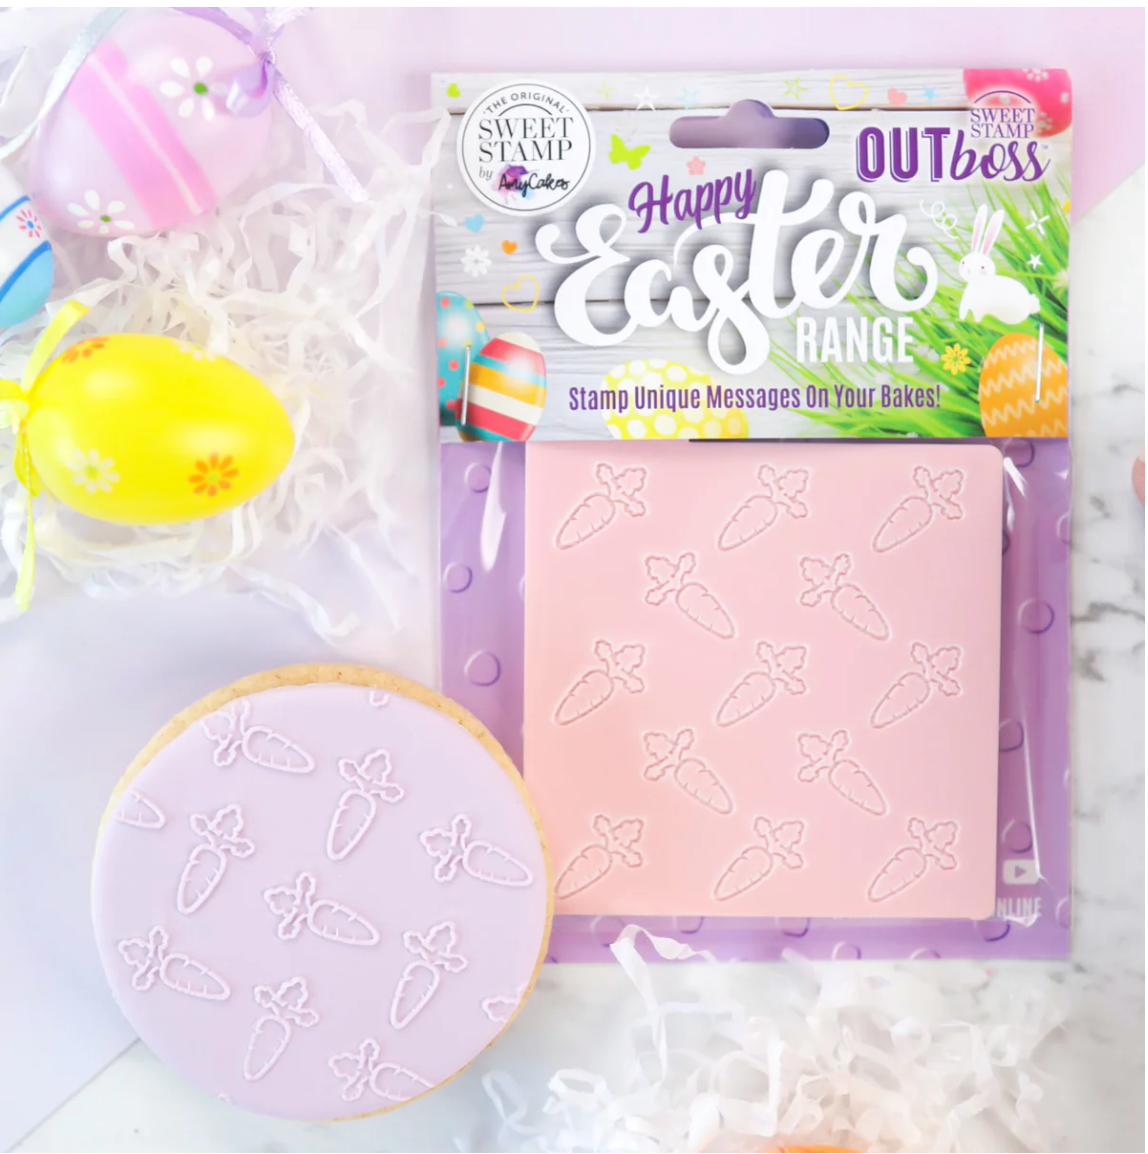 OUTBOSS EASTER CARROT PATTERN  BY SWEET STAMP